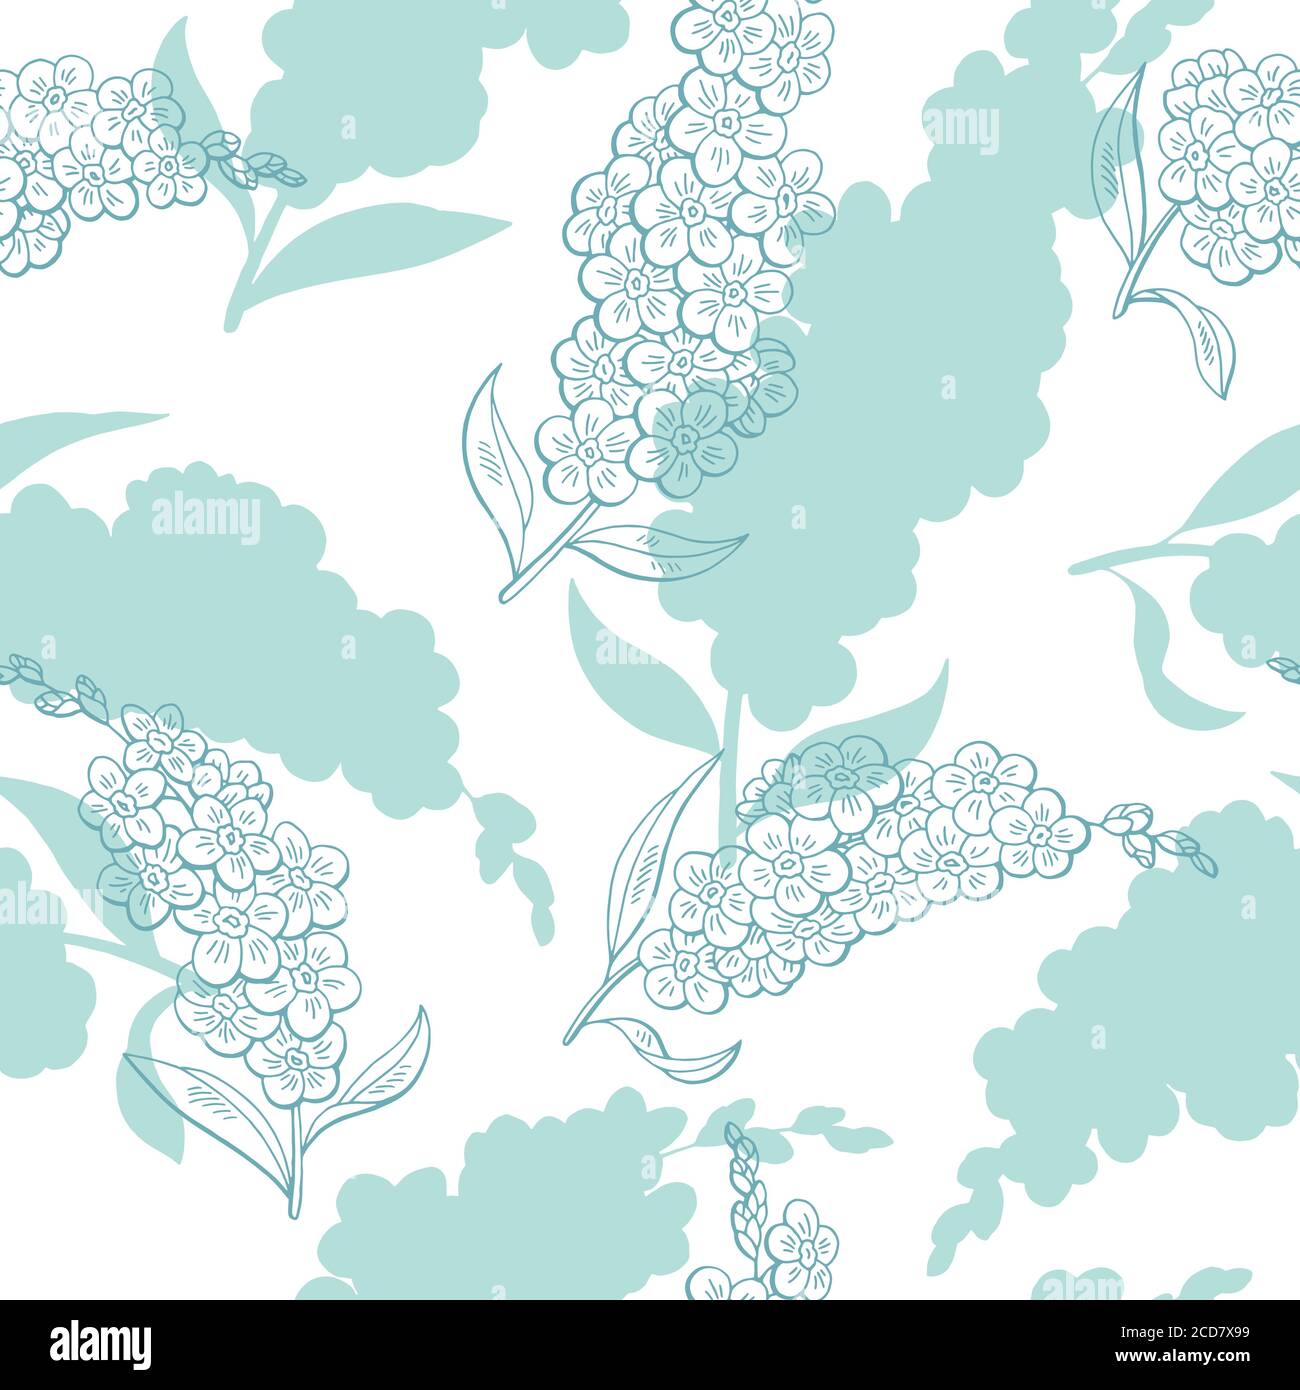 Forget me not flower graphic blue color seamless pattern sketch illustration vector Stock Vector